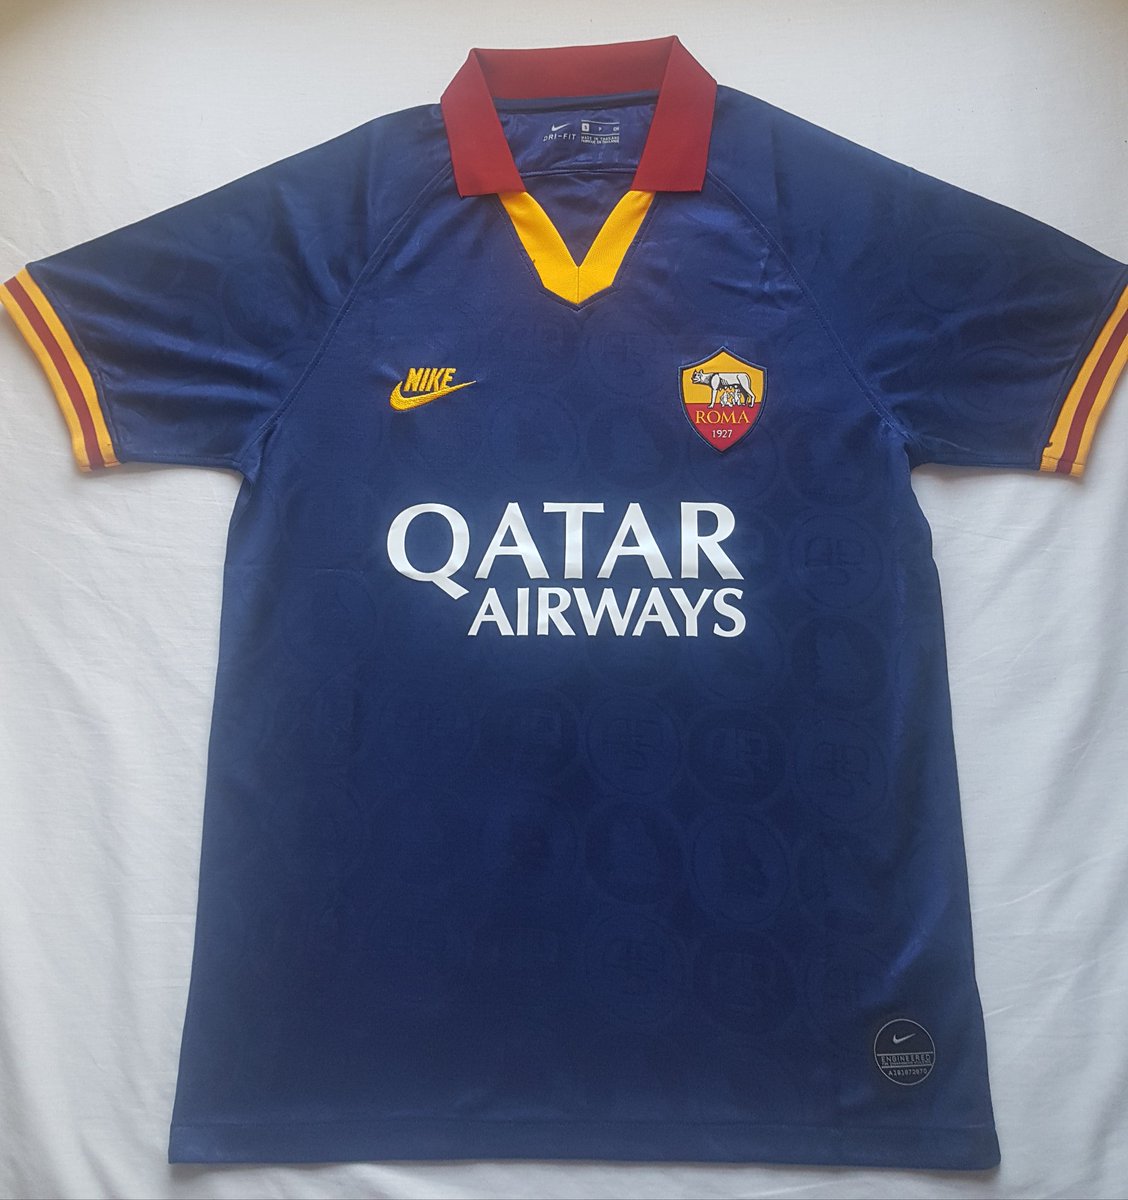 Day 37:AS Roma 3rd shirt, 2019/20.Don't even need a description here. Absolutely unreal shirt from  @ASRomaEN here and an easy 10/10. @homeshirts1  @TheKitmanUK